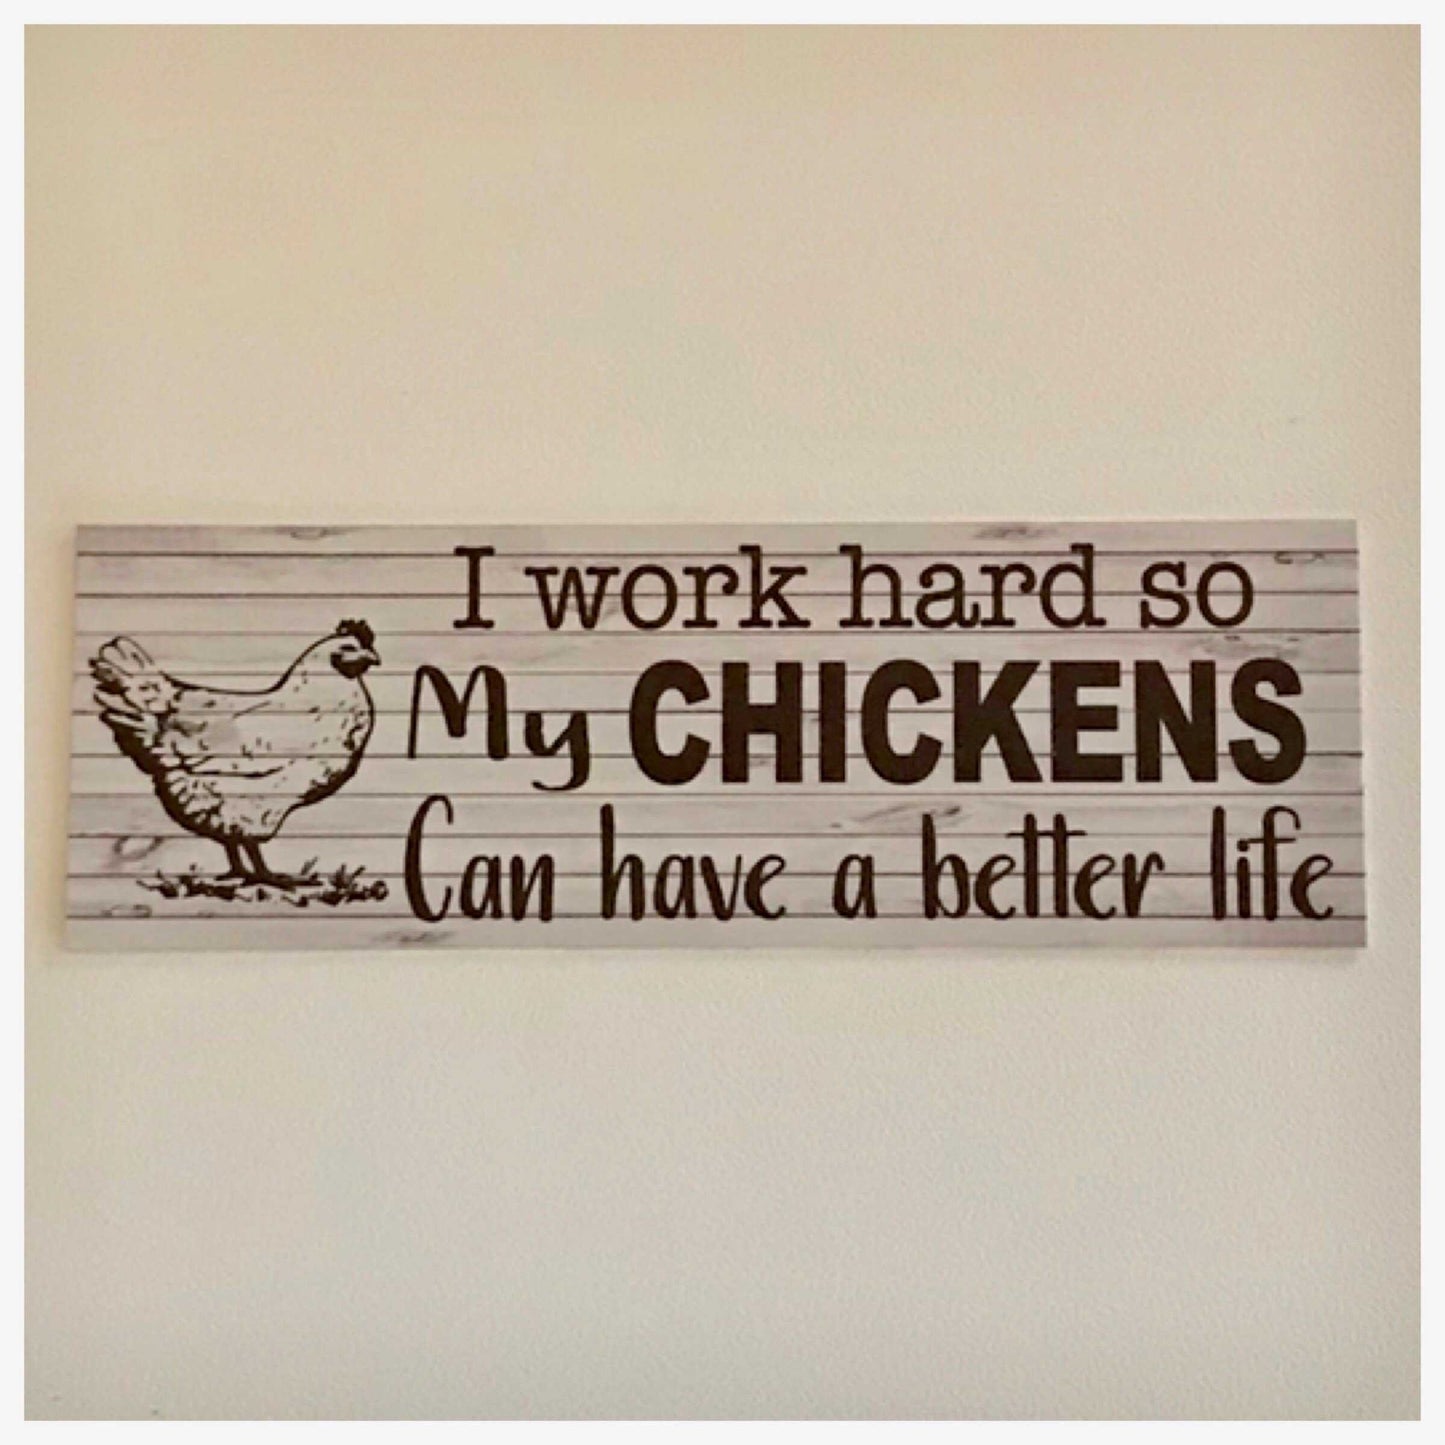 Chickens I work so hard so my can have a better life Sign